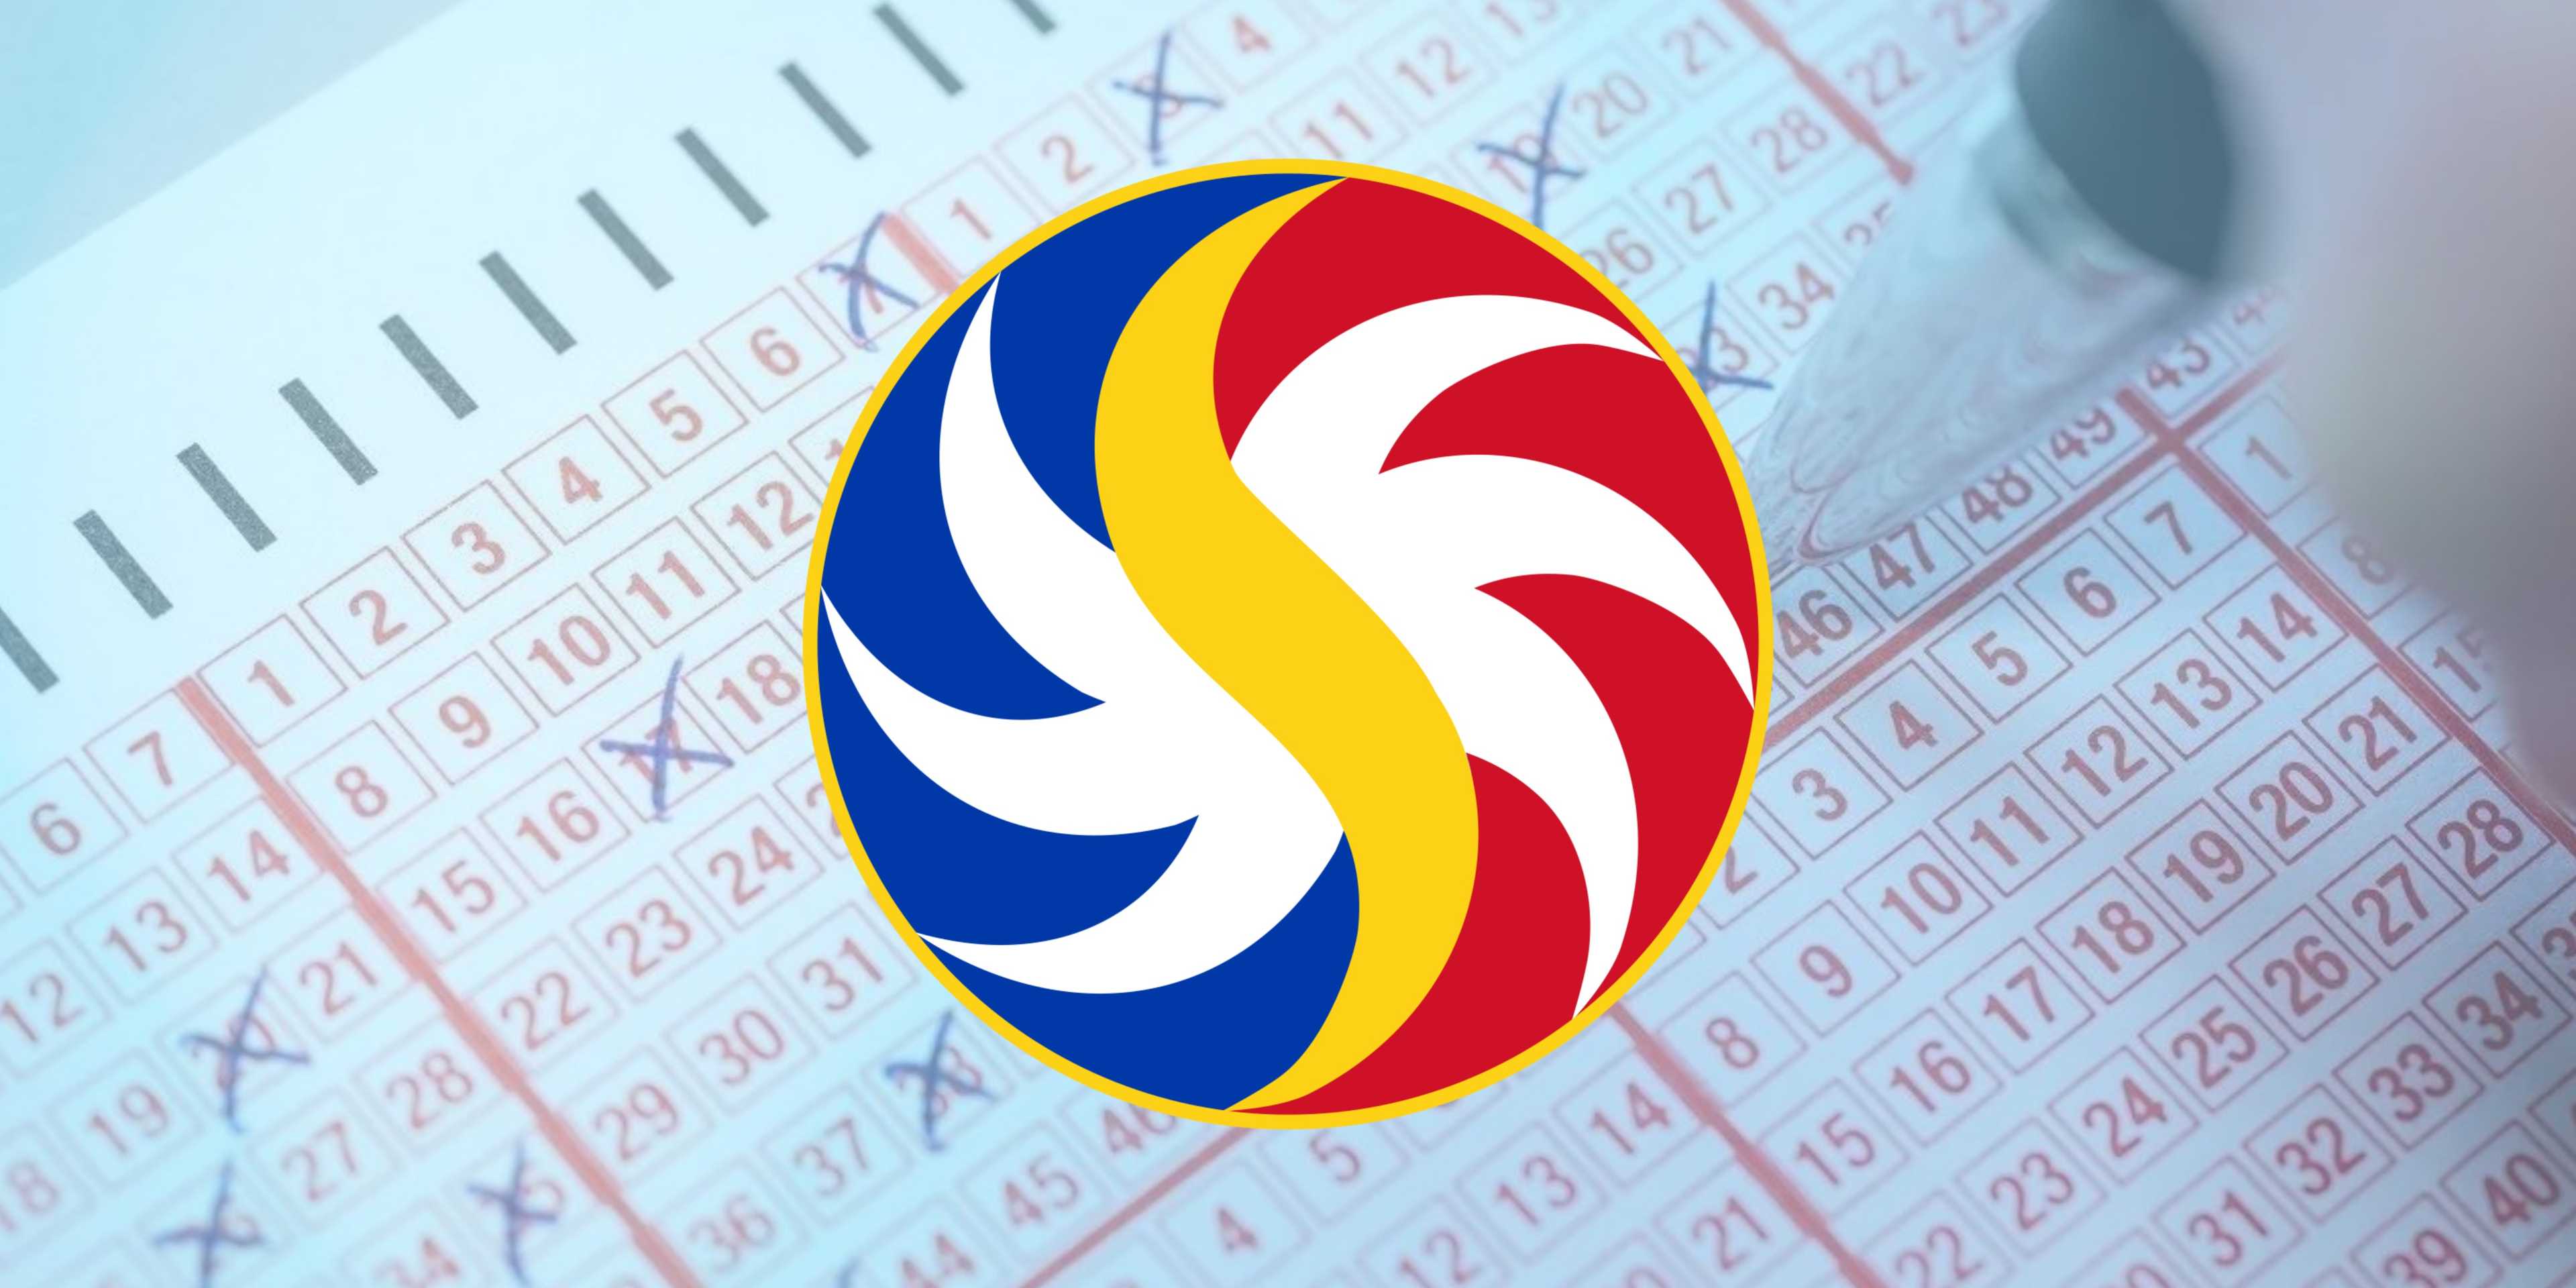 PCSO Lotto Draw Results on Thursday, February 1